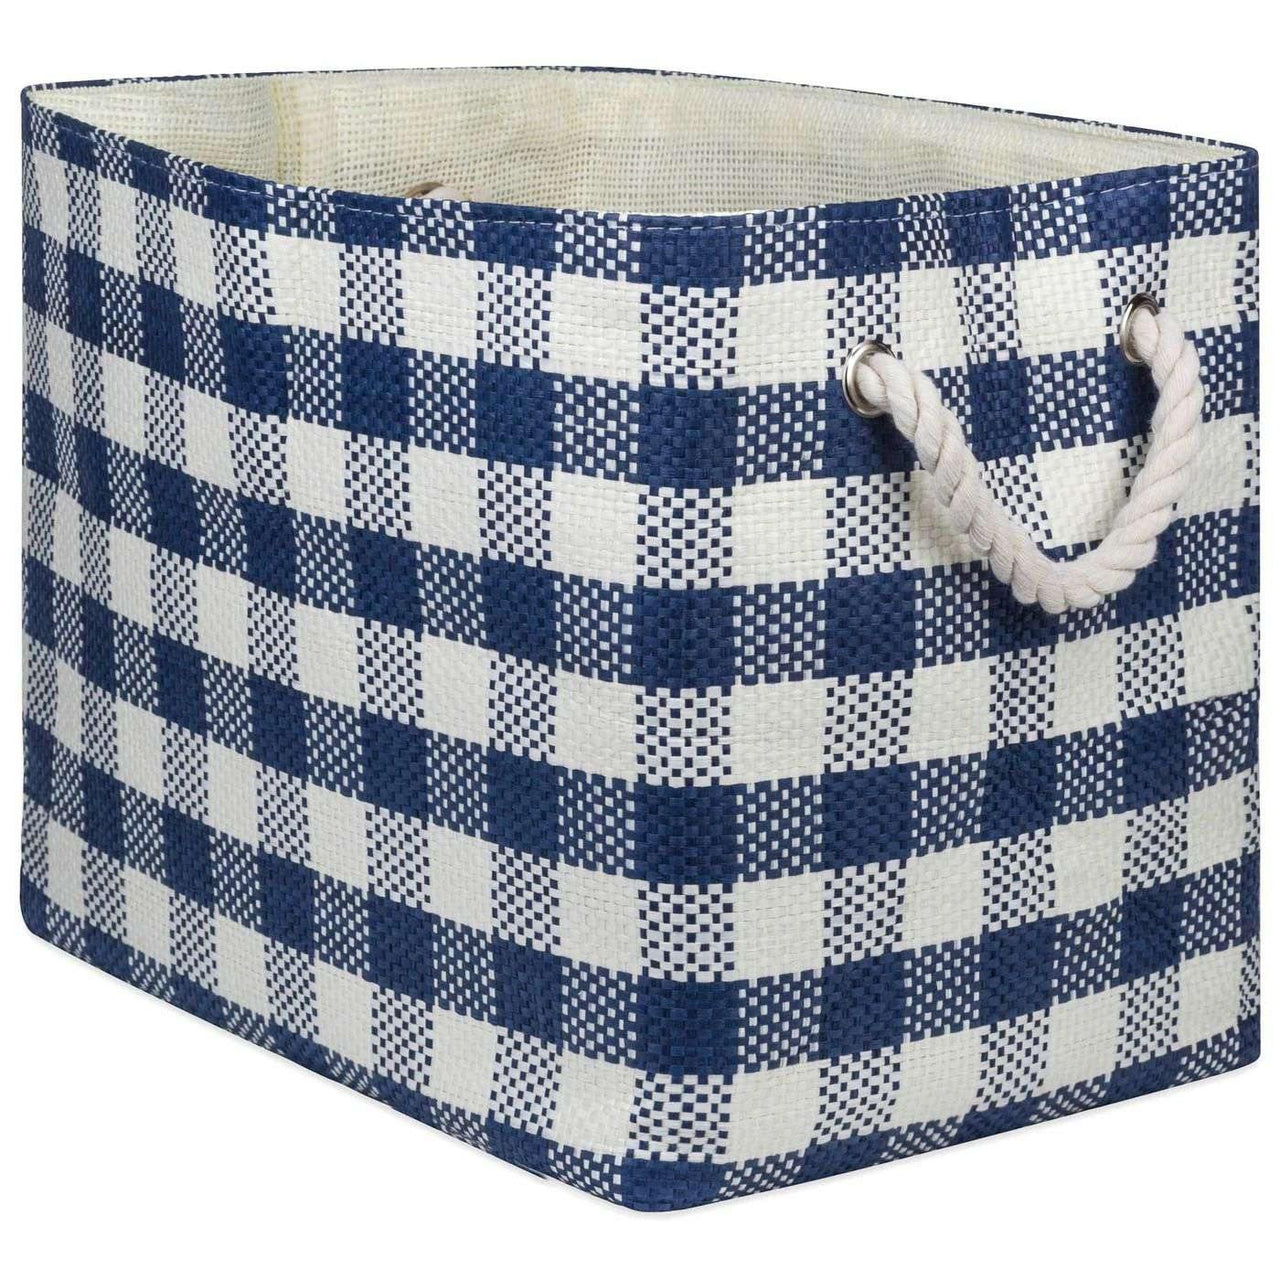 Paper Bin Checkers Navy Rectangle Large 17X12X12